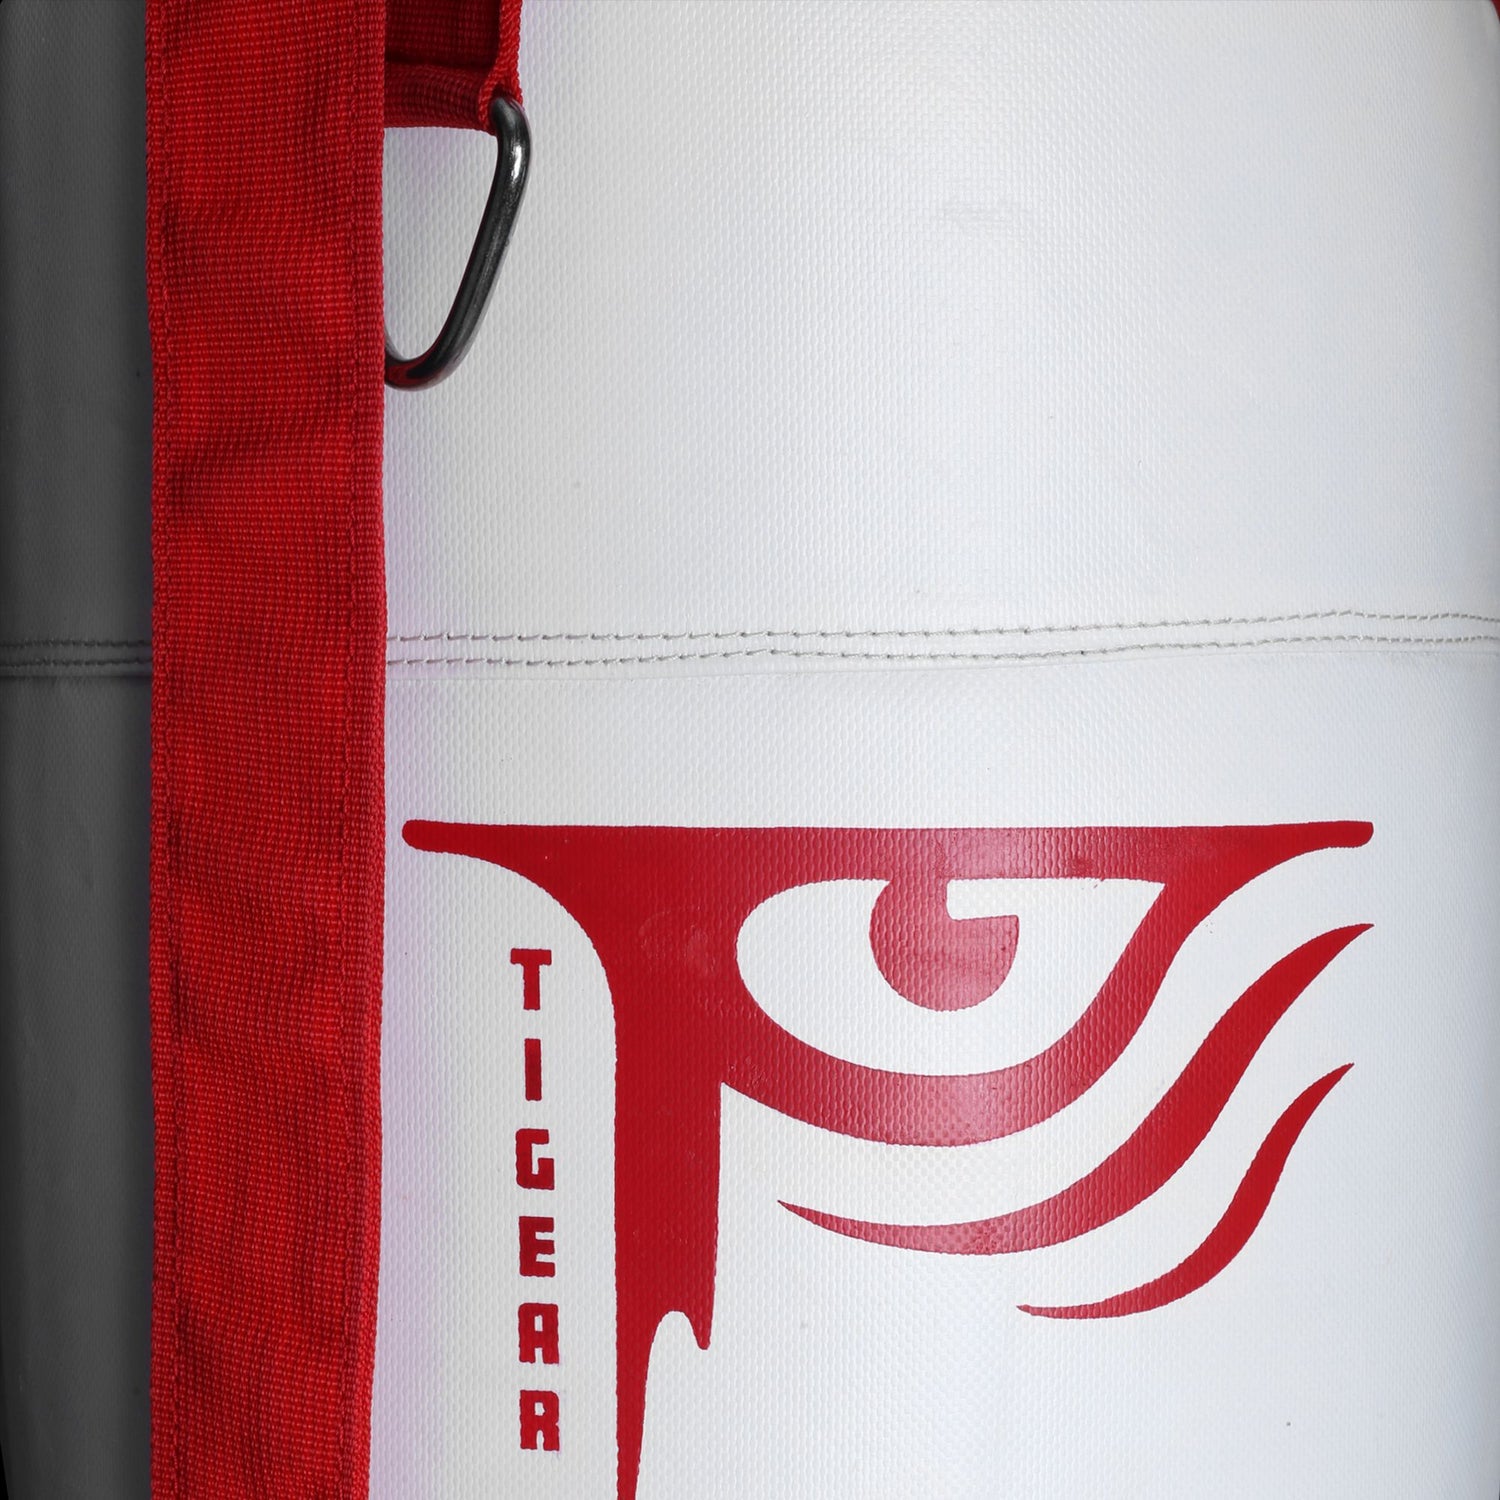 Hanging Heavy Bag Red/White/Blue